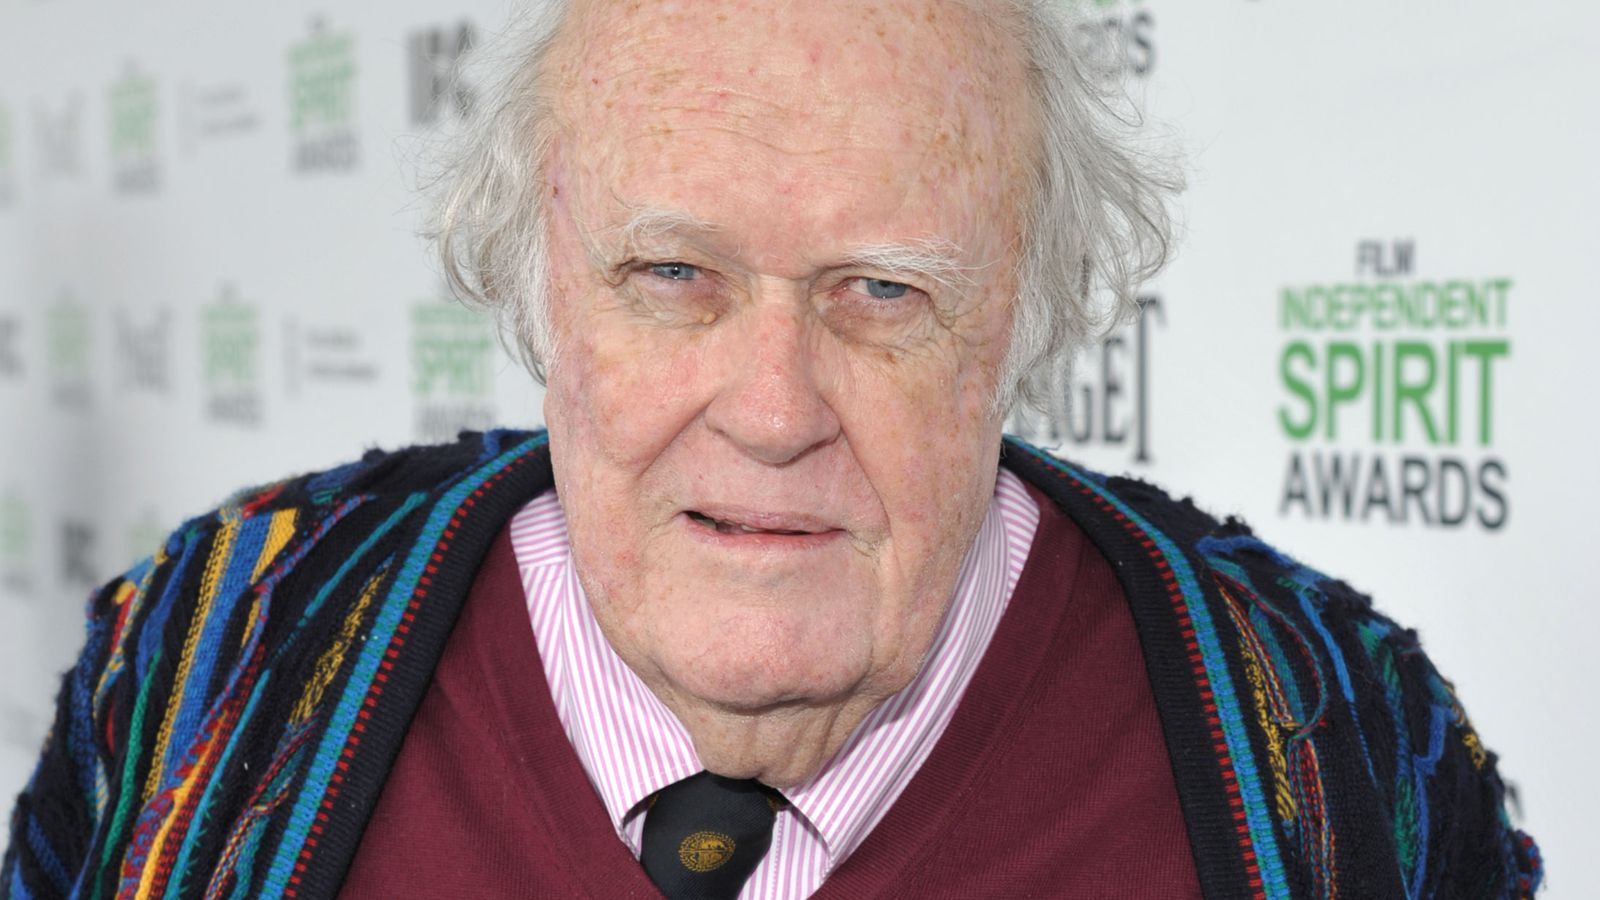 M Emmet Walsh Blade Runner And Knives Out Actor Dies Ents And Arts News Sky News